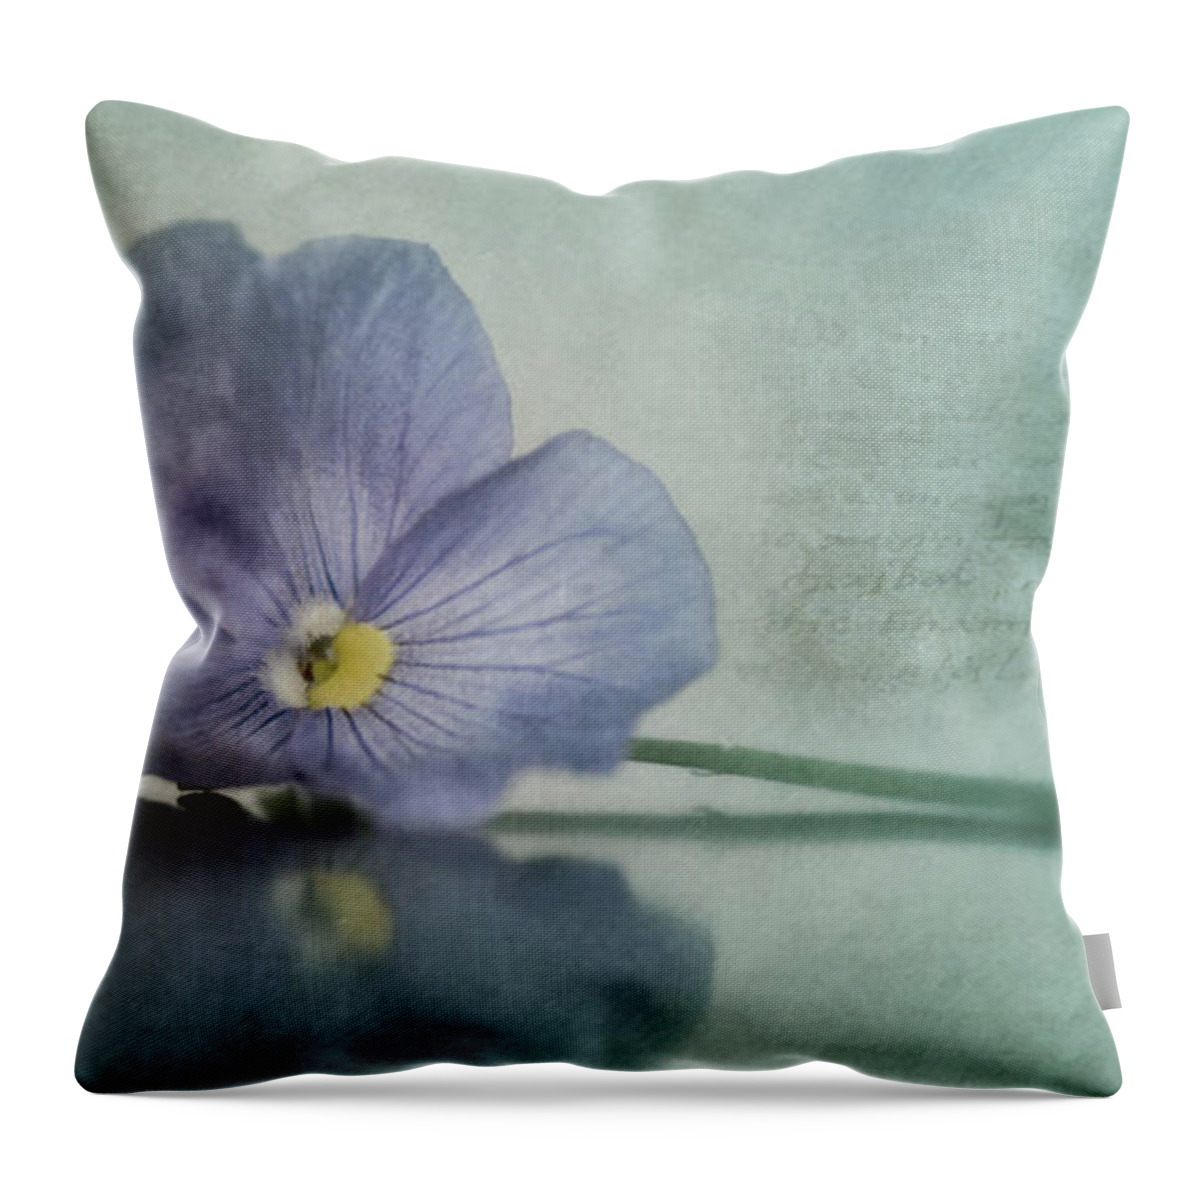 Pansy Throw Pillow featuring the photograph Resting by Priska Wettstein